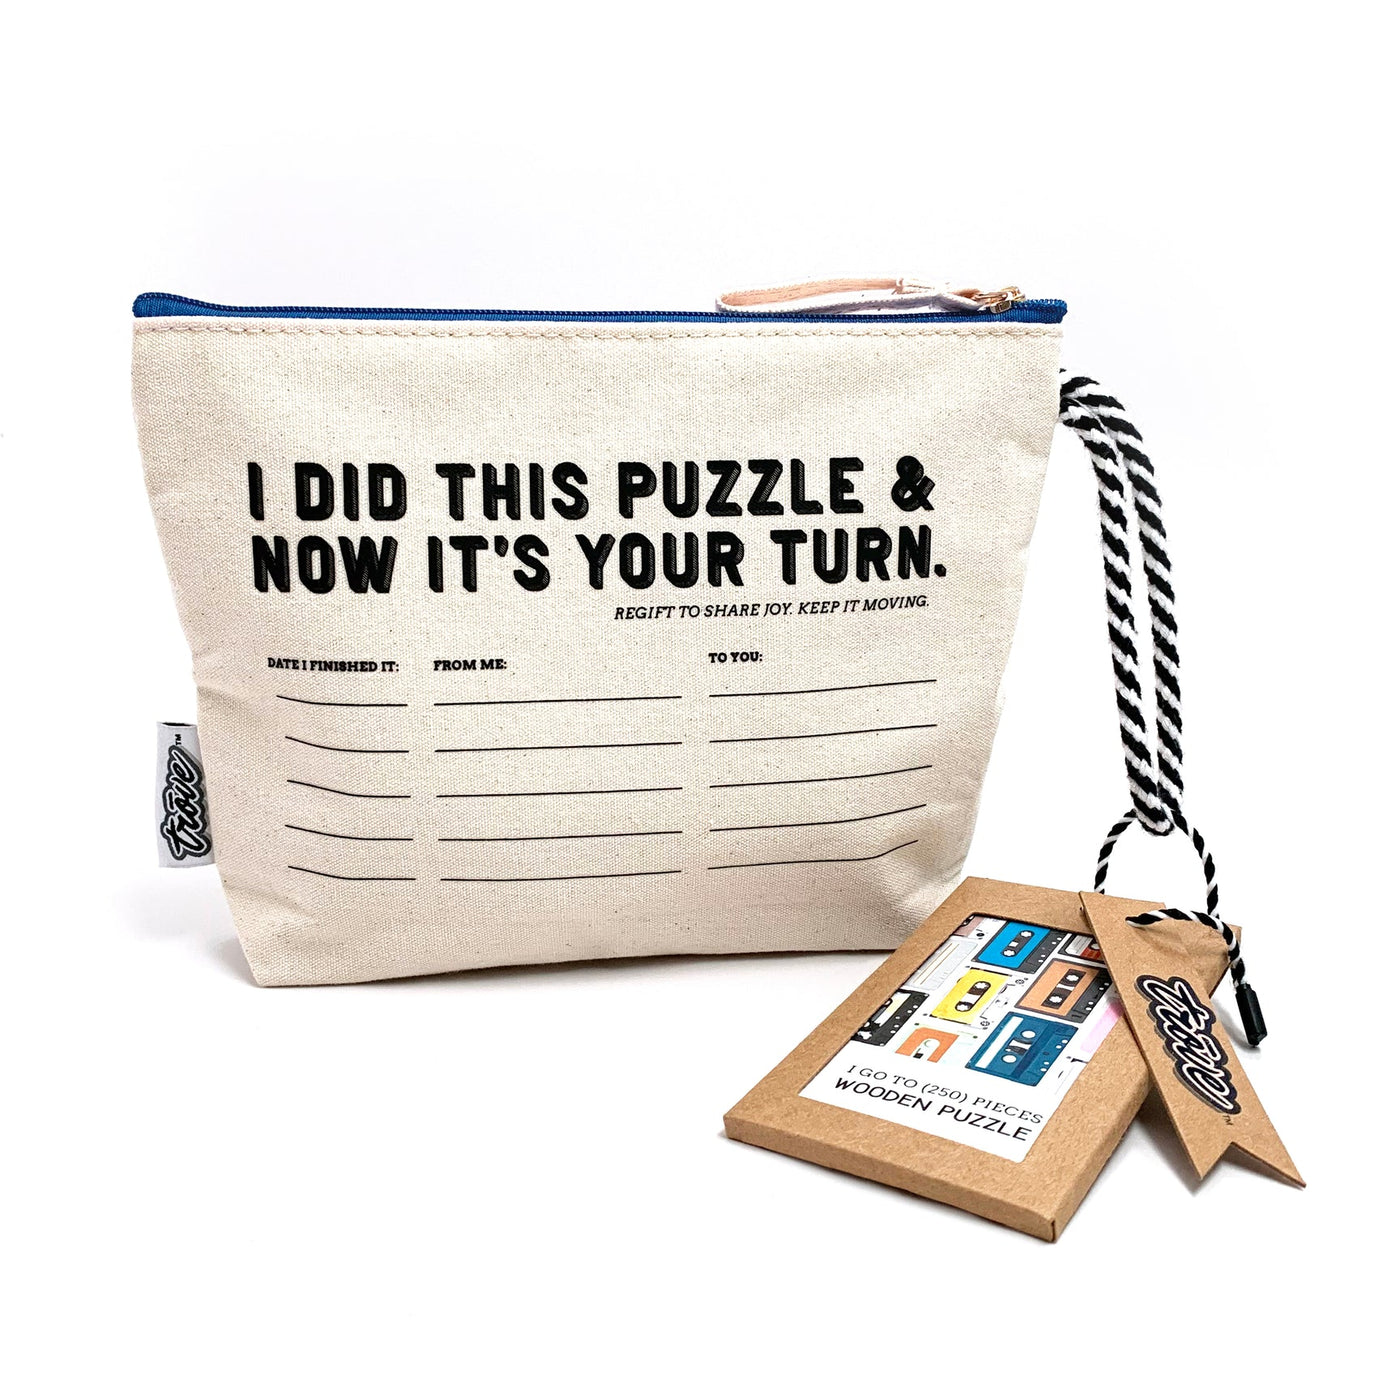 I Go To (250) Pieces Wooden Puzzle: Mixed Tape in Pass-It-On Pouch